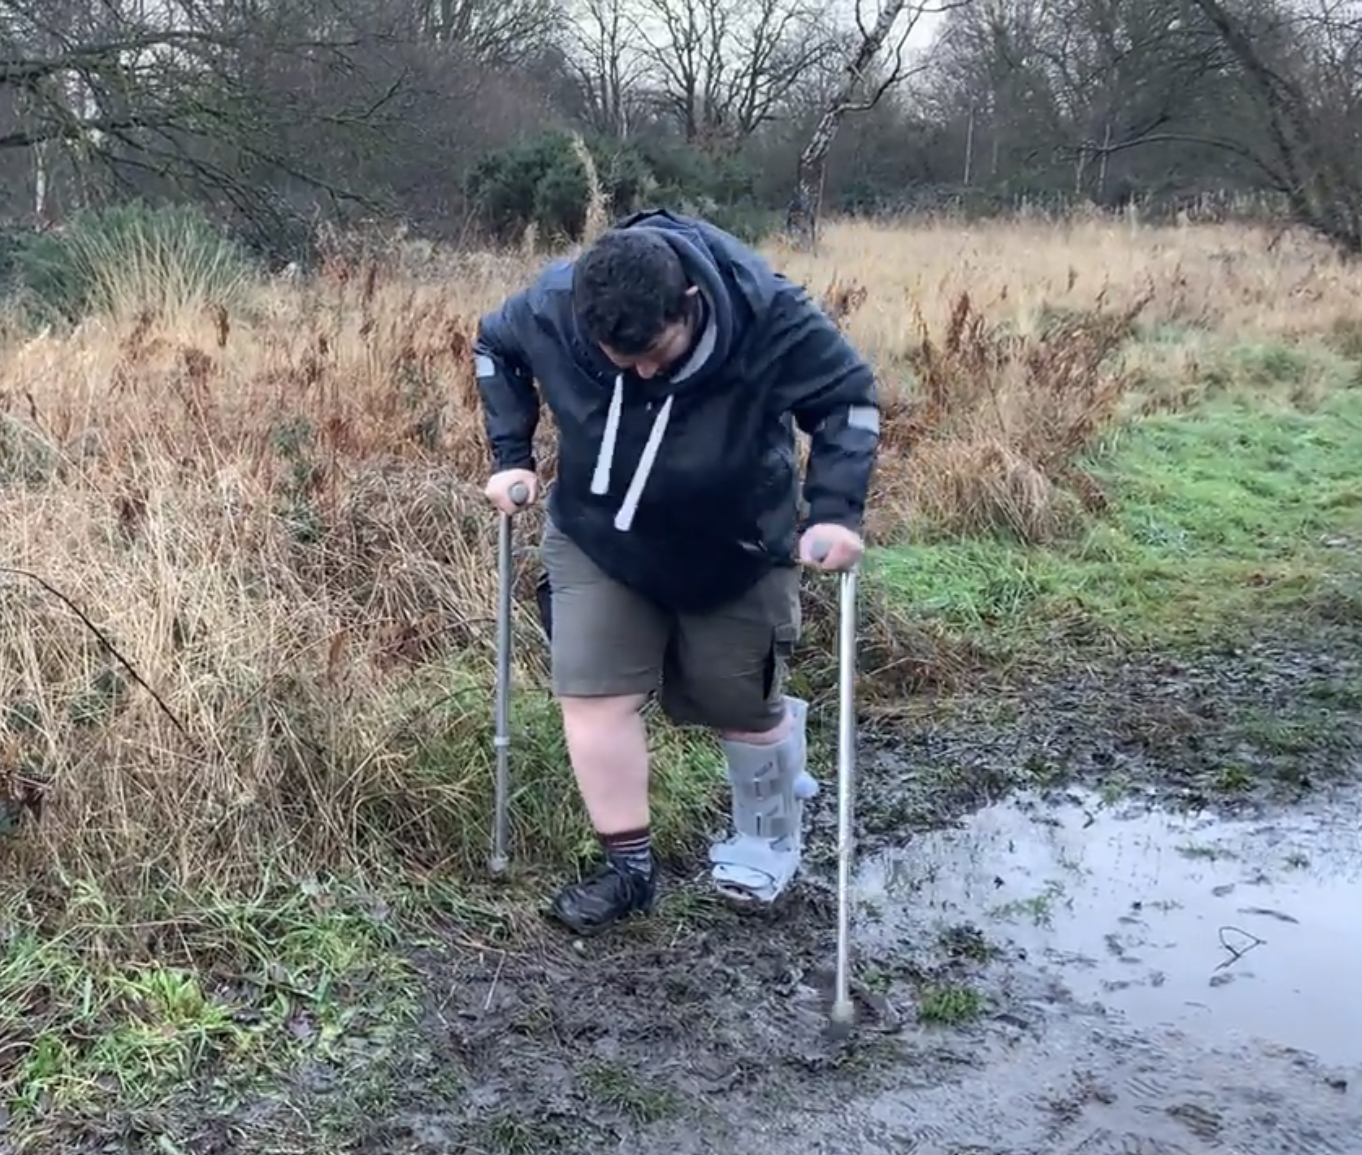 Off-roading with crutches